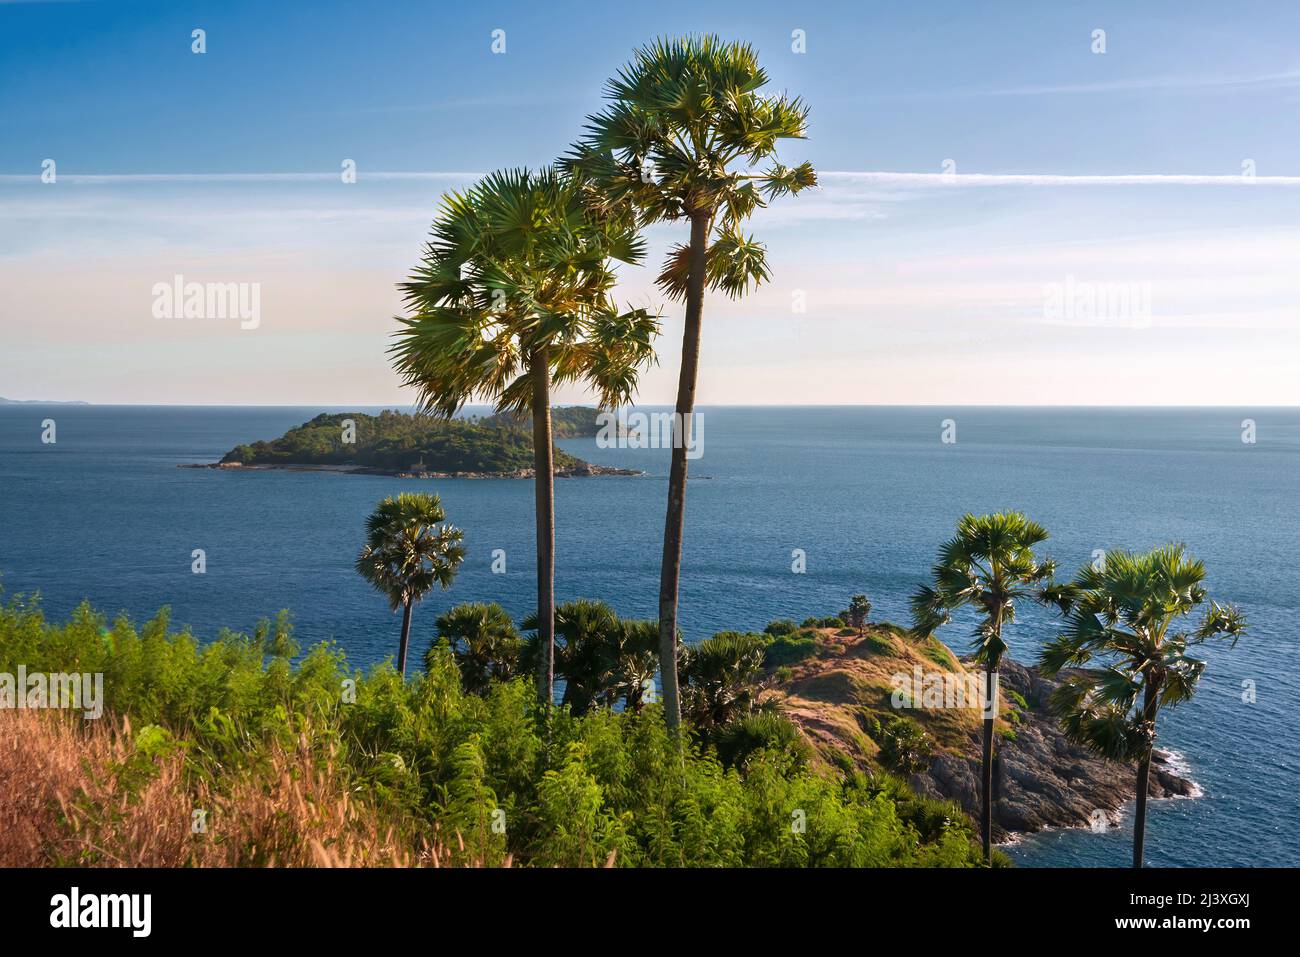 Beautiful tropical seascape with island view through exotic palm trees on a clear sunny day. Stock Photo